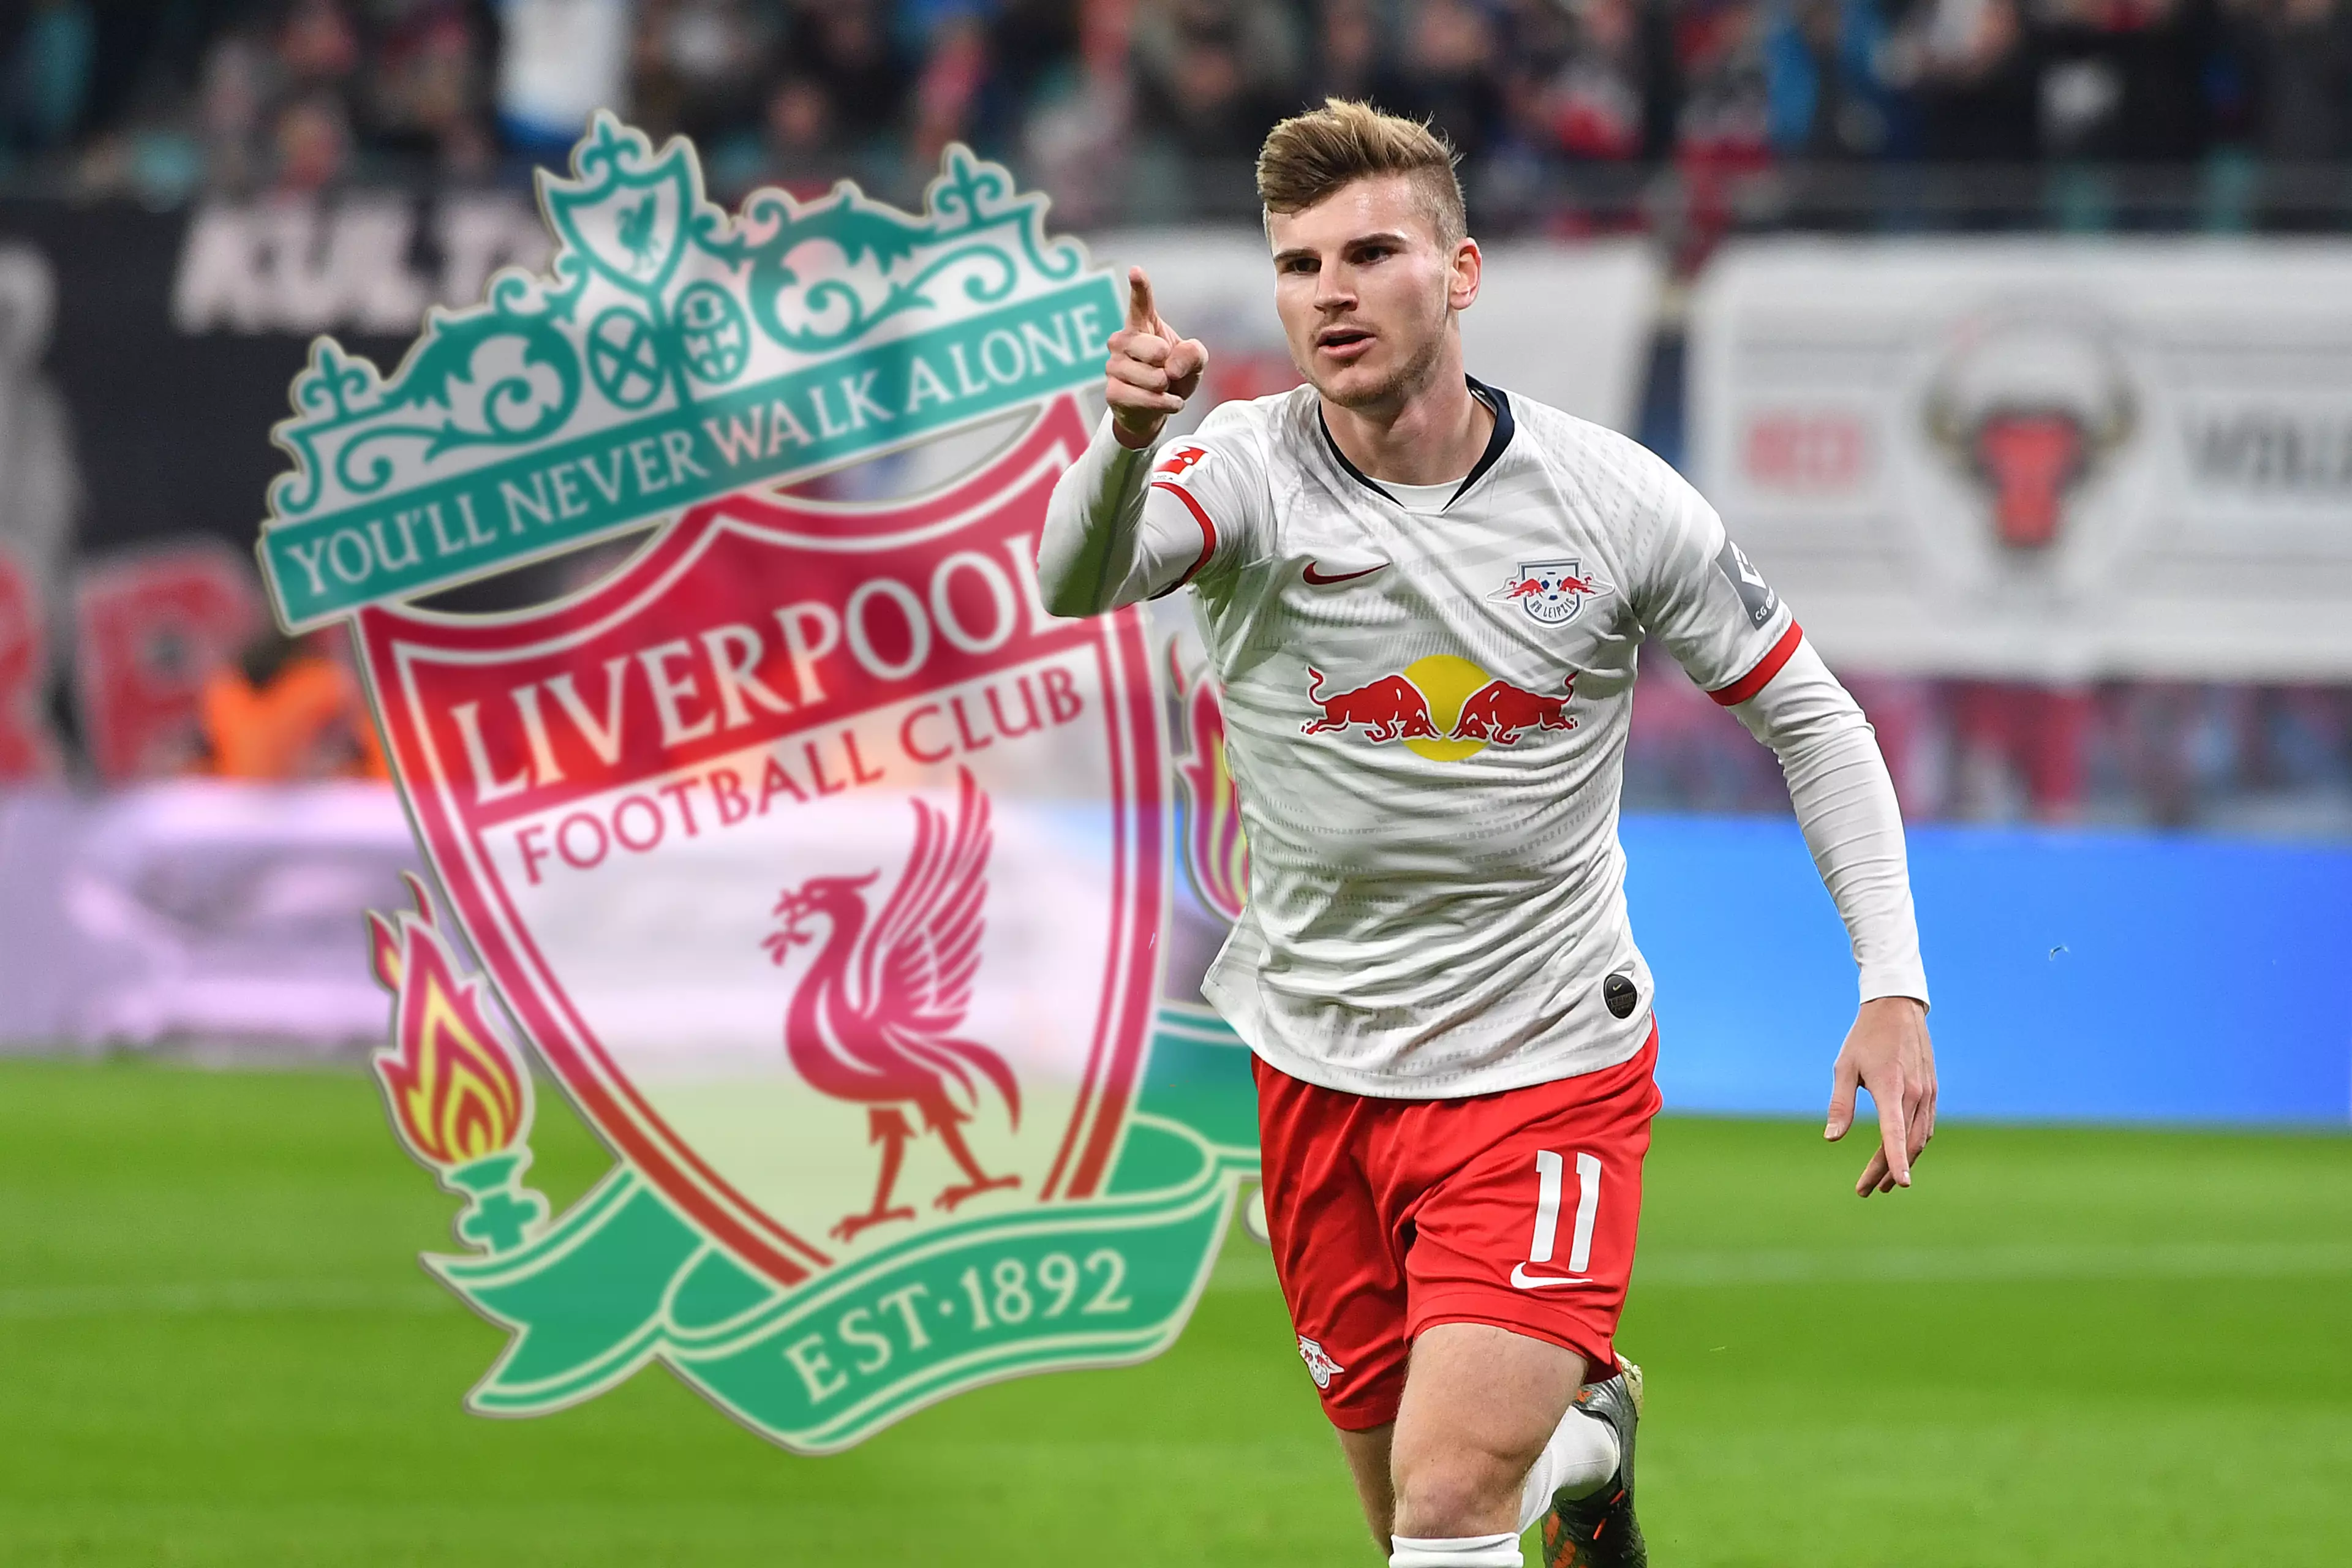 Werner has been heavily linked with a move to Liverpool. Image: PA Images